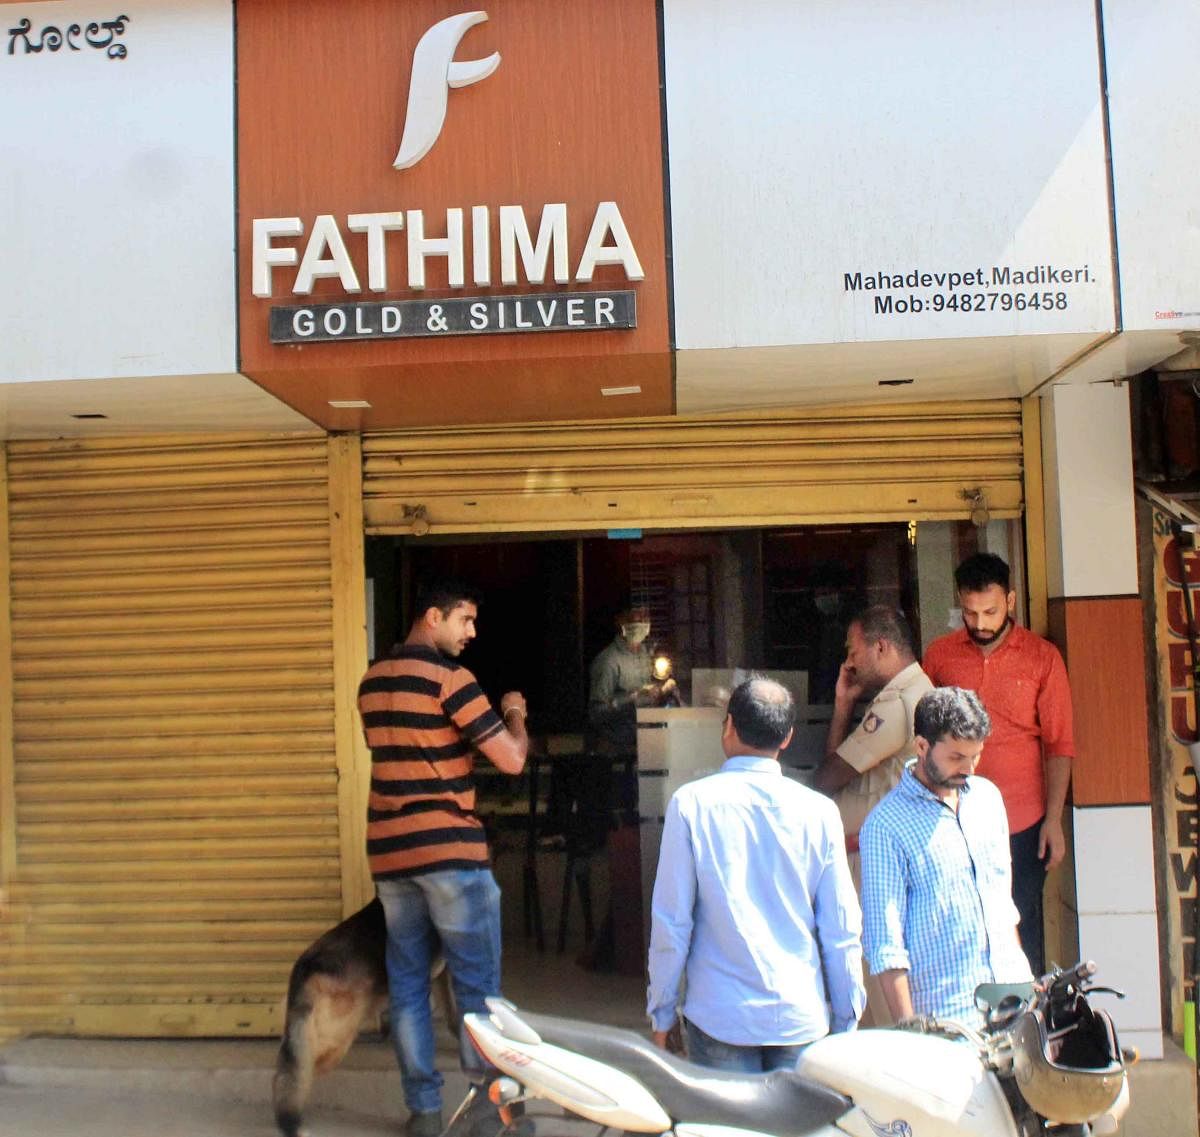 A dog squad and fingerprint experts inspect 'Fathima Gold and Silver' jewellery shop in Madikeri.